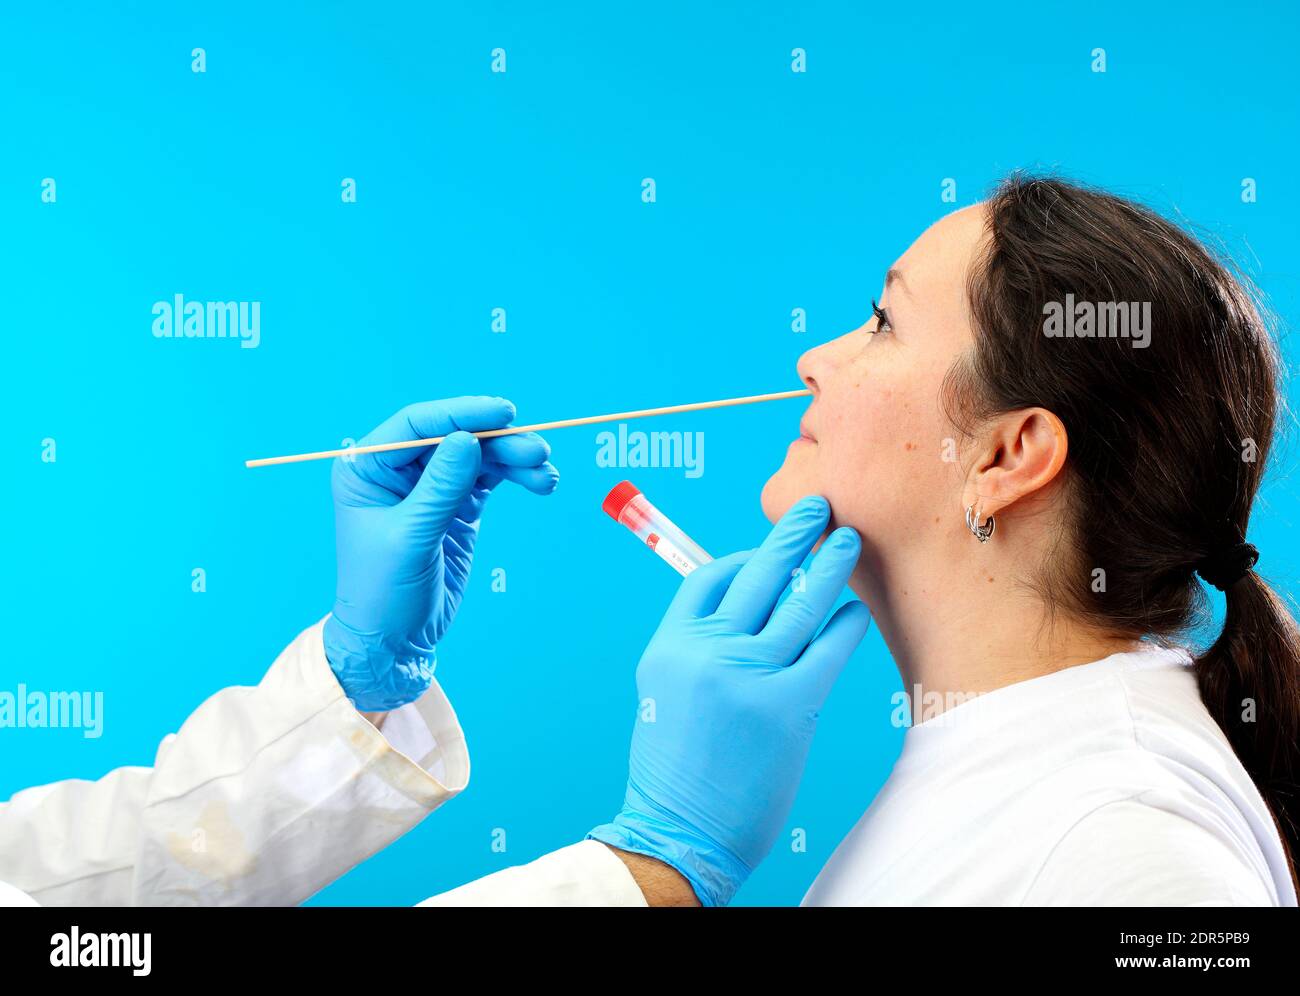 testing for the presence of Covid-19 antibodies Stock Photo